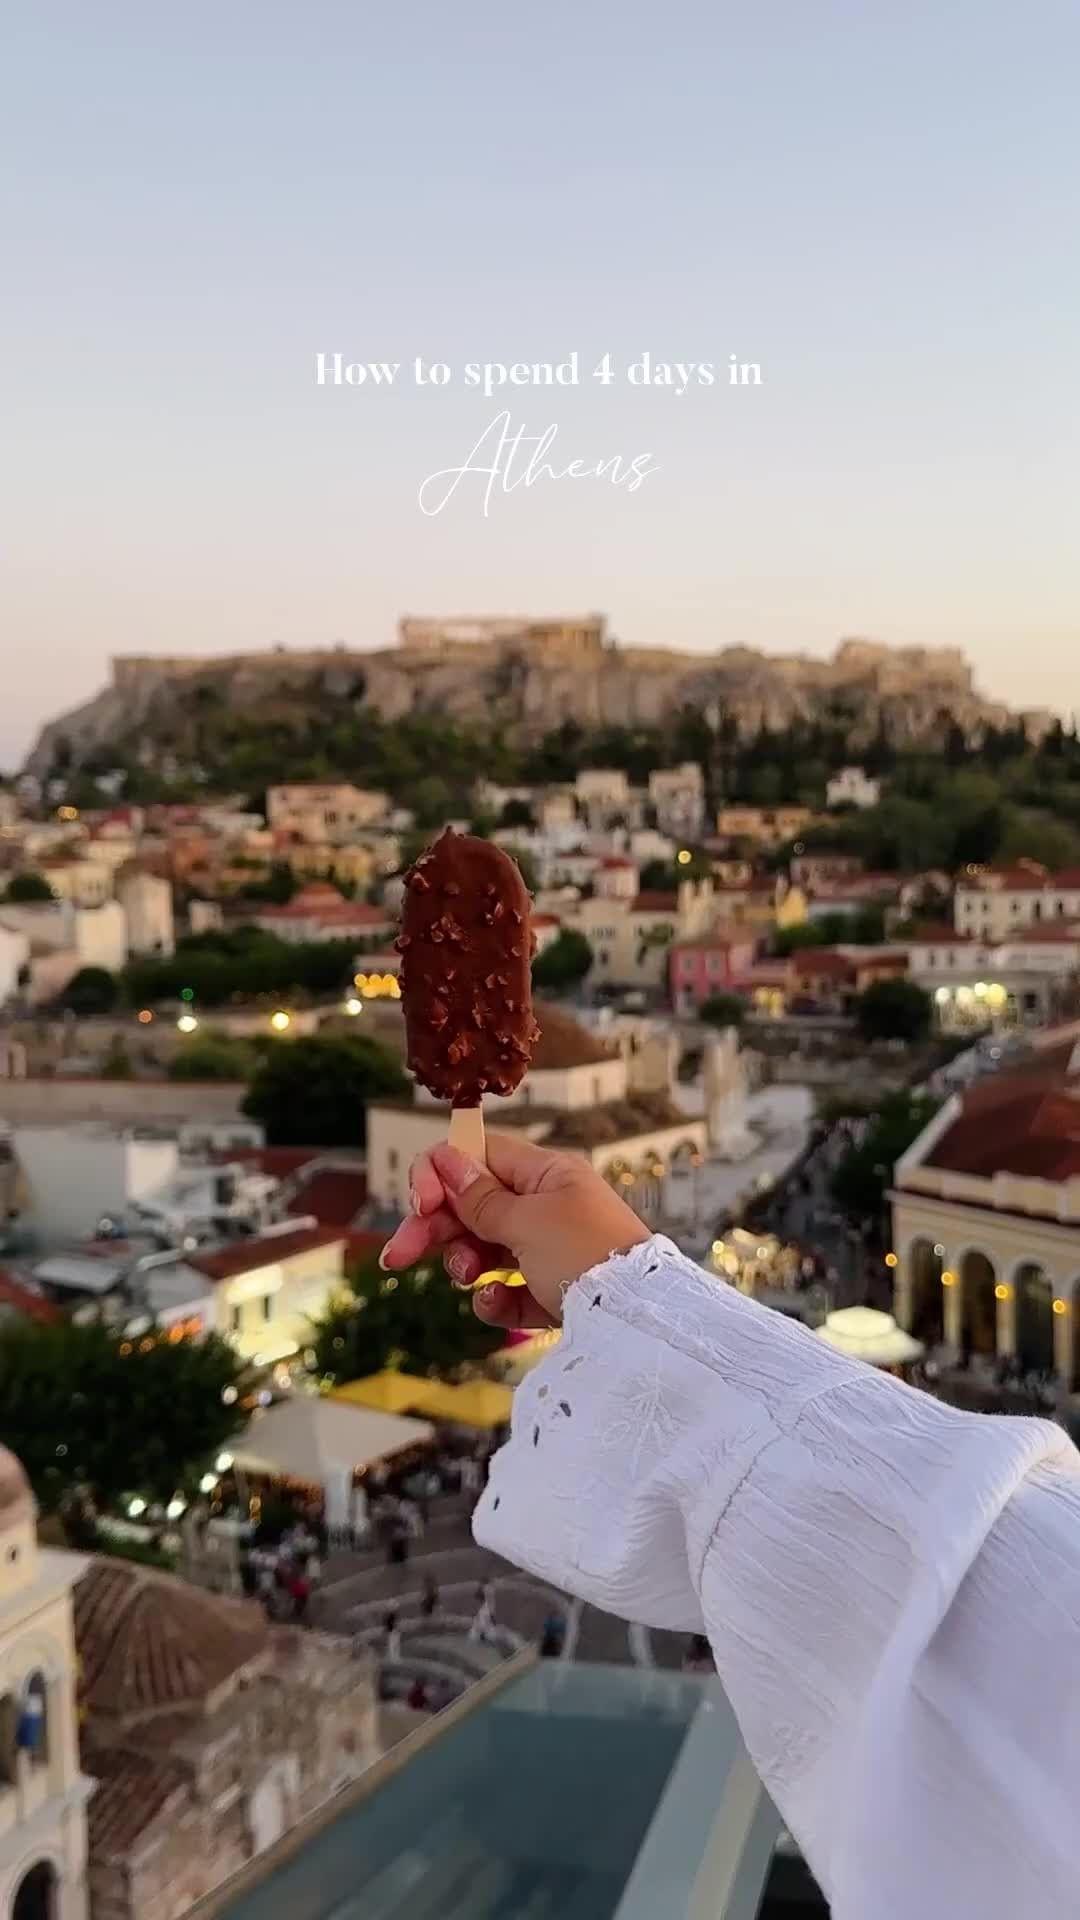 class="content__text"
 Discover how to spend 4 days in Athens with @katemeets and her trusty companion, @nuii_icecream_global 🍦🏛️ 
 